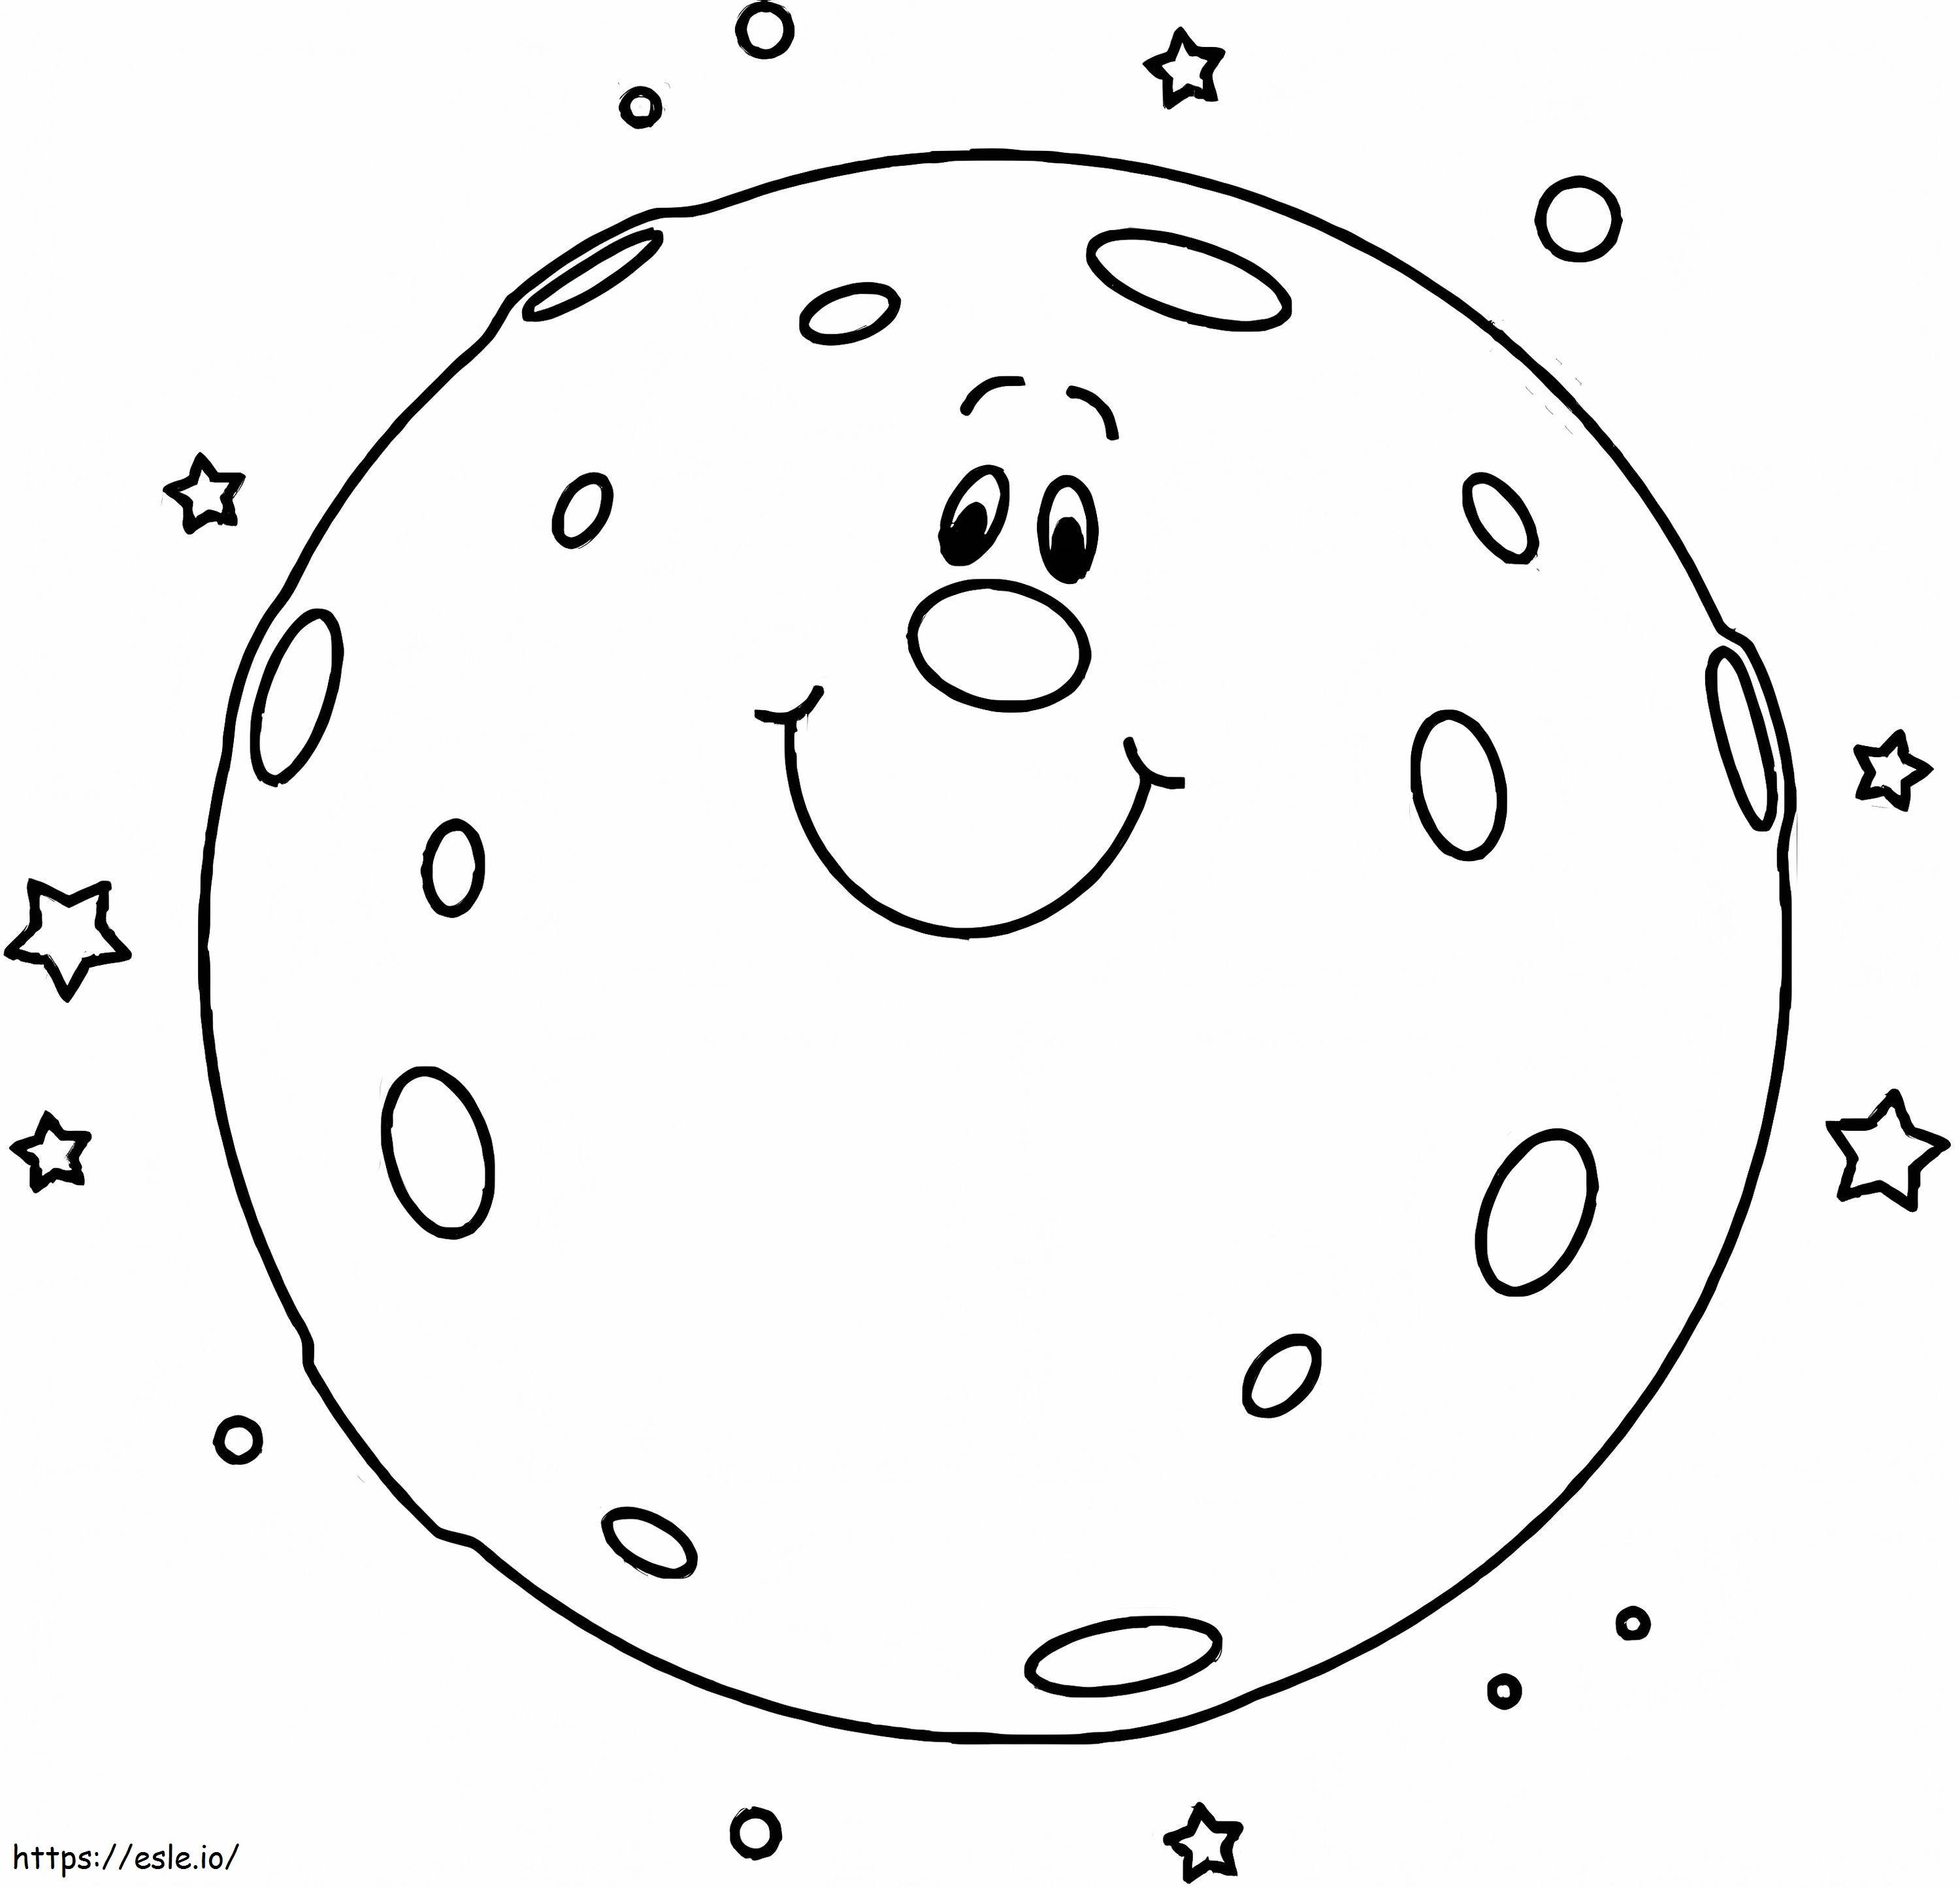 Smiling Planet coloring page